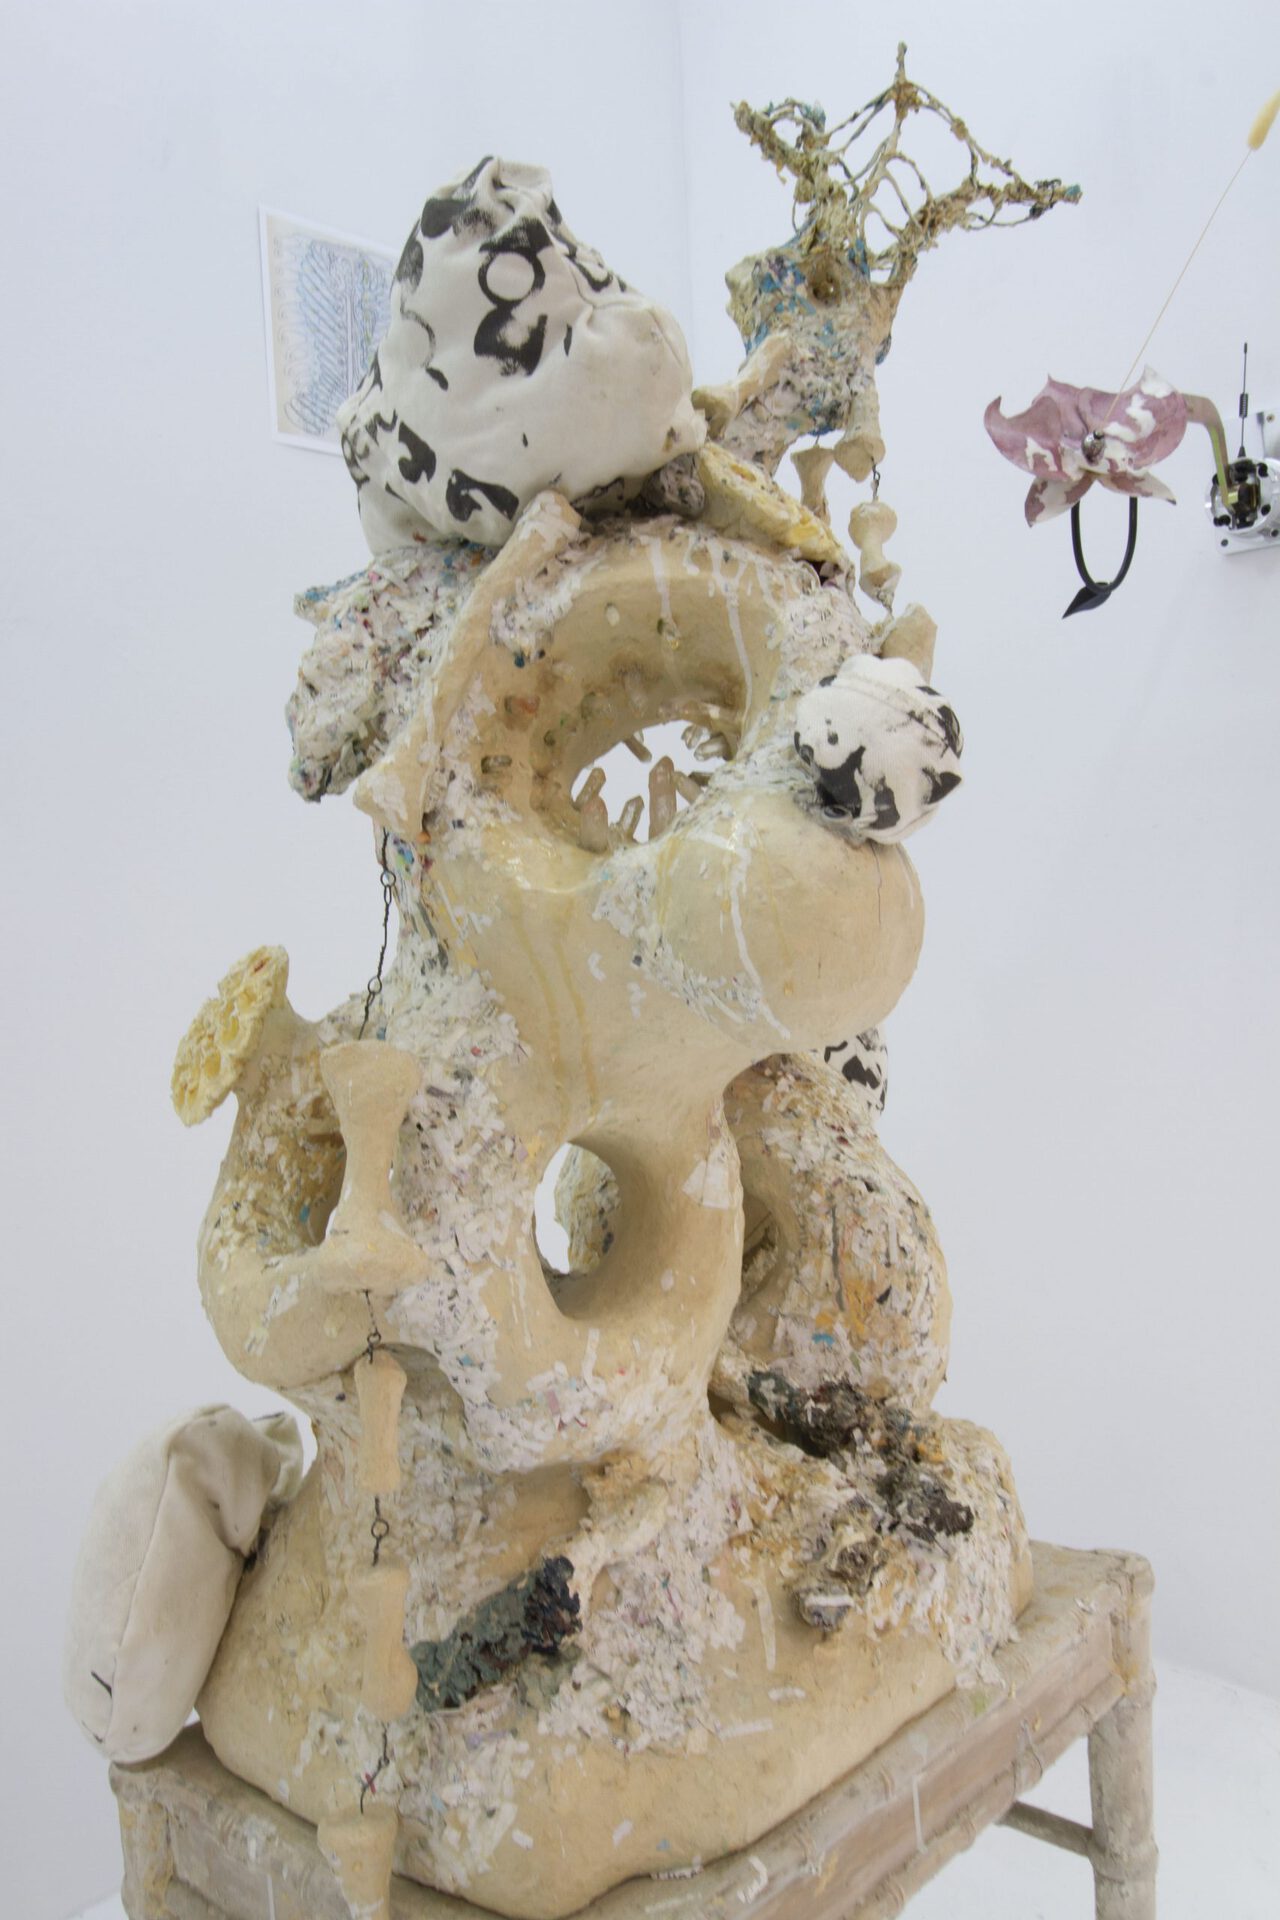 Randy Wray. Chapter and Verse. Wood, papier-mâché, sewn canvas, quartz crystals, wire, acrylic paint, oil paint, resin, mica. 53 x 27 x 20 inches. 2017